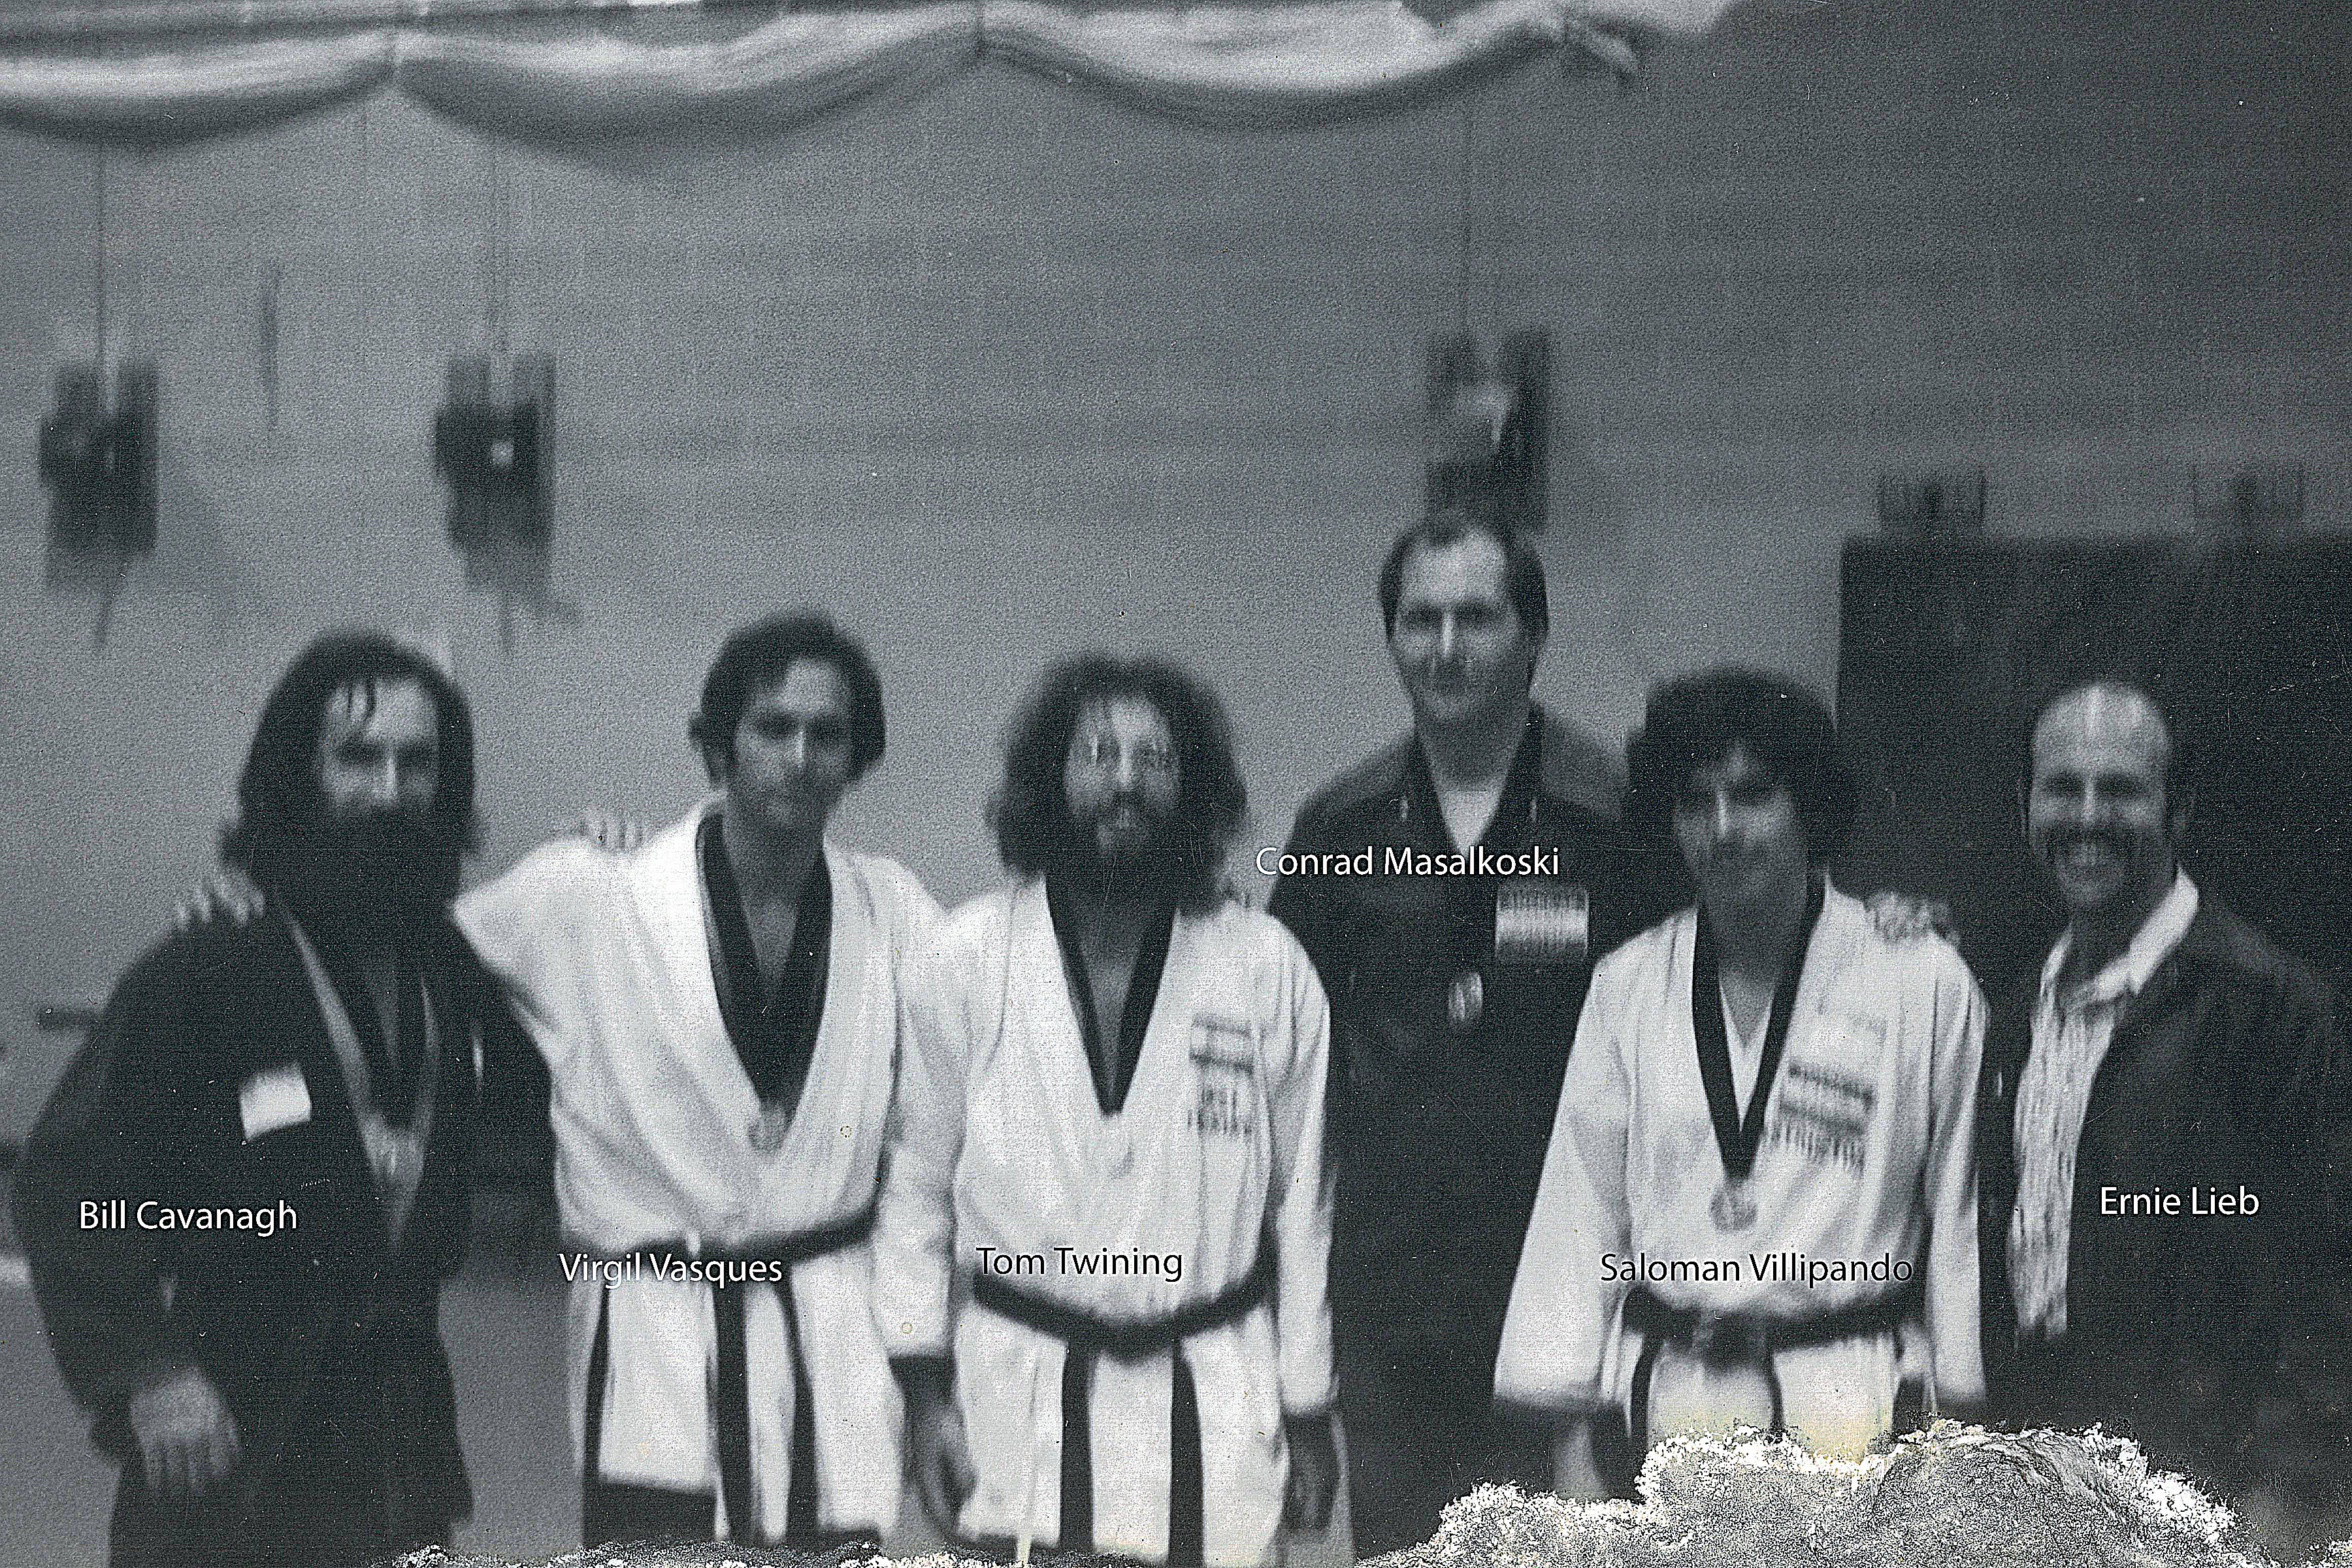 Karate Group from the 70's